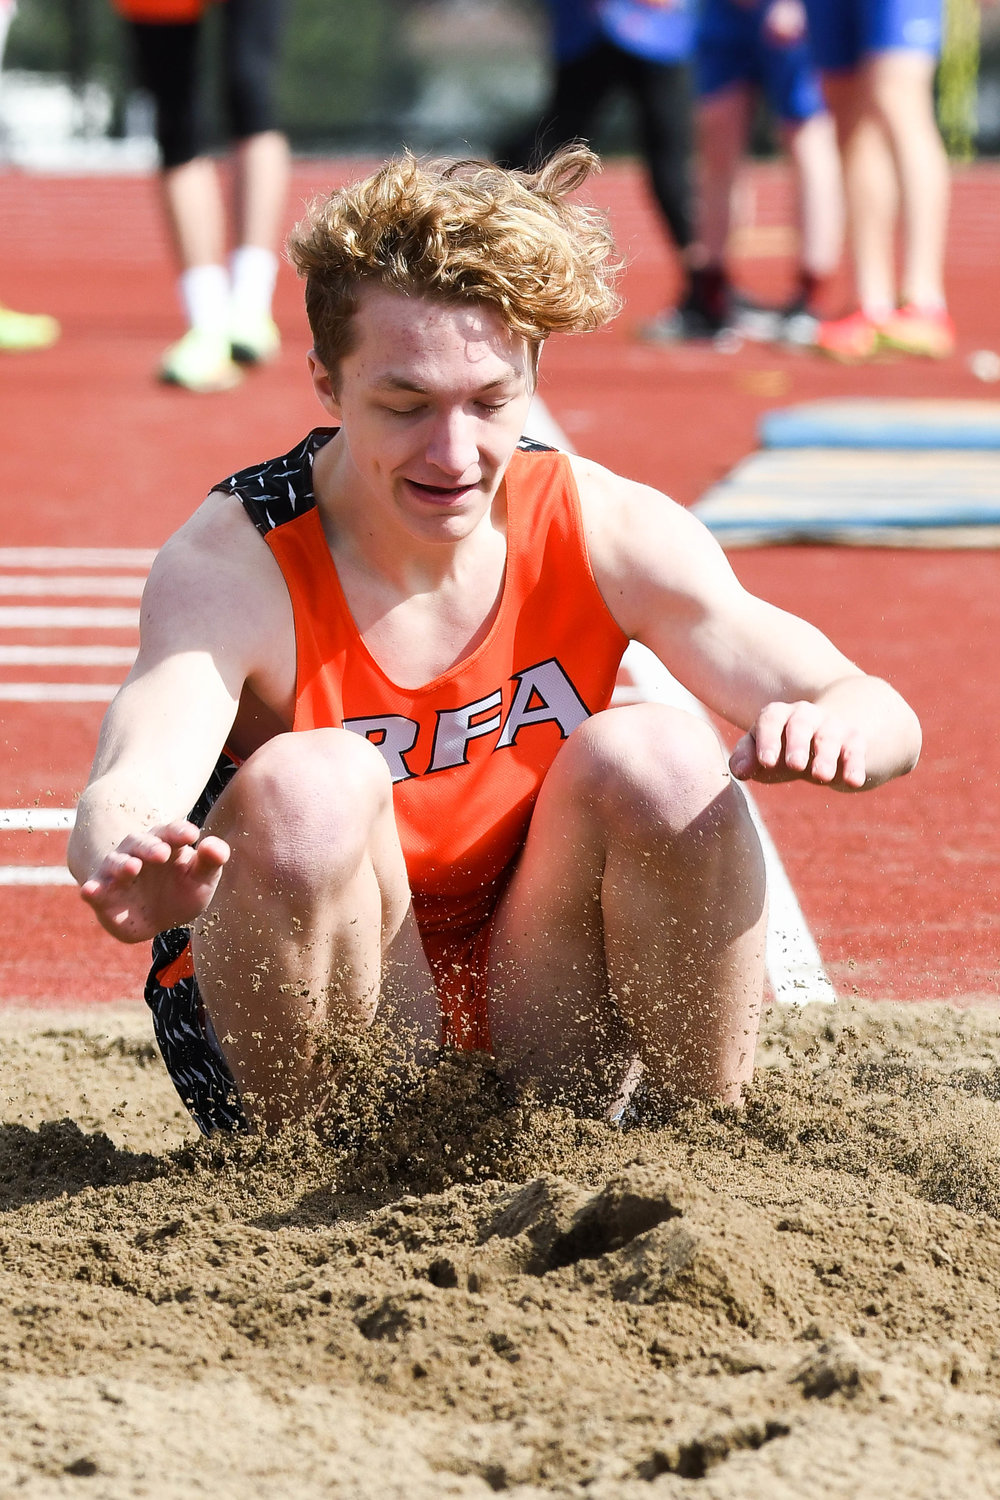 Rome Free Academy's Levi Linder competes in the long jump during a track and field relay meet on Tuesday at PHS Stadium in Utica.